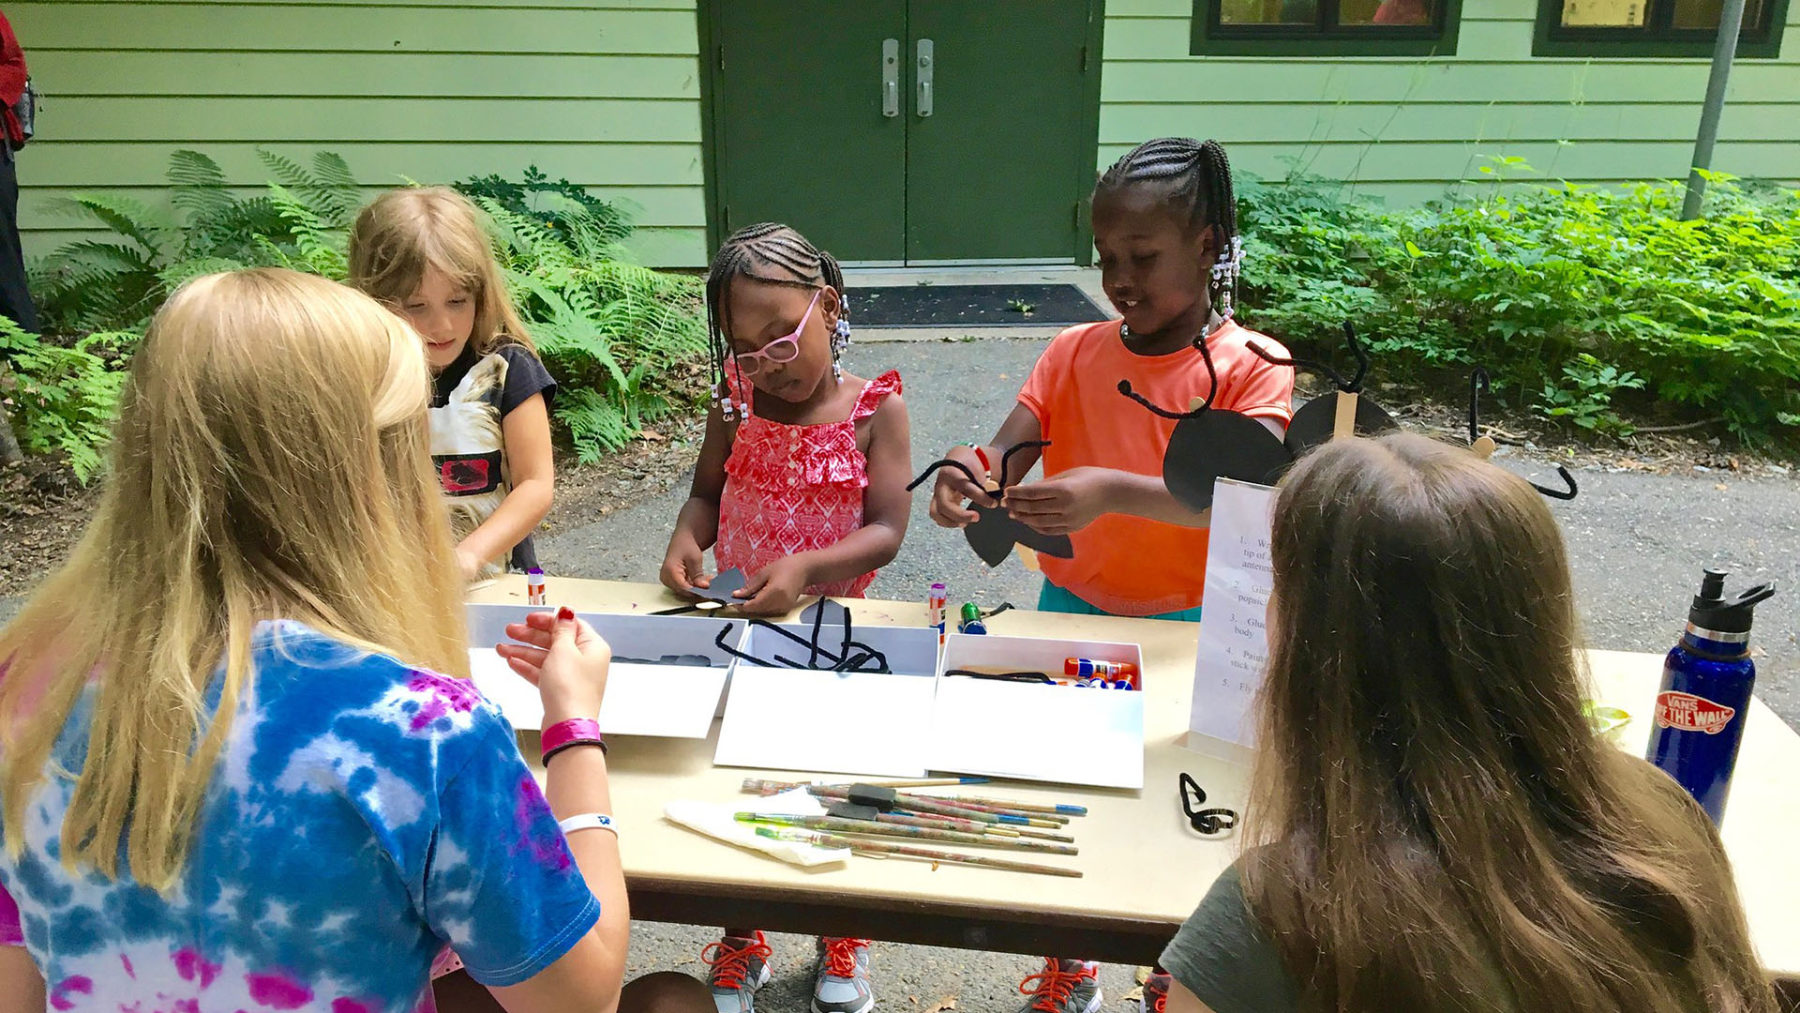 Kids playing and making an art craft at Brookside Nature Center